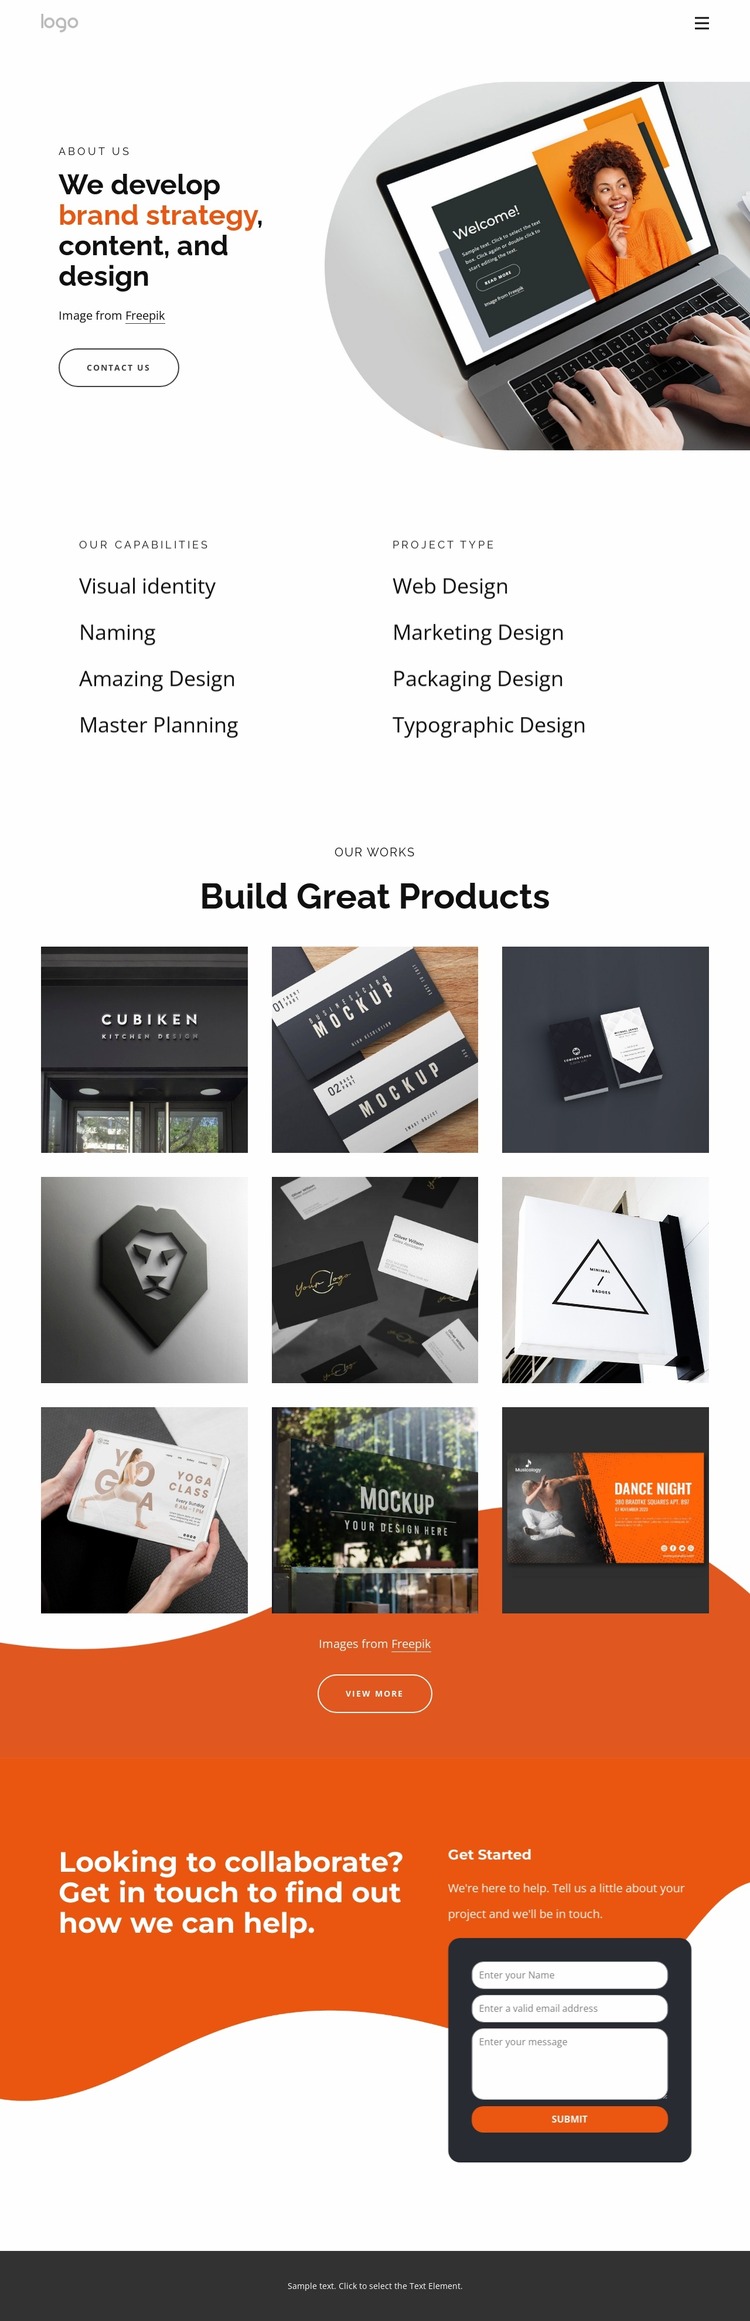 We create thoughtful experiences for humans Html Website Builder